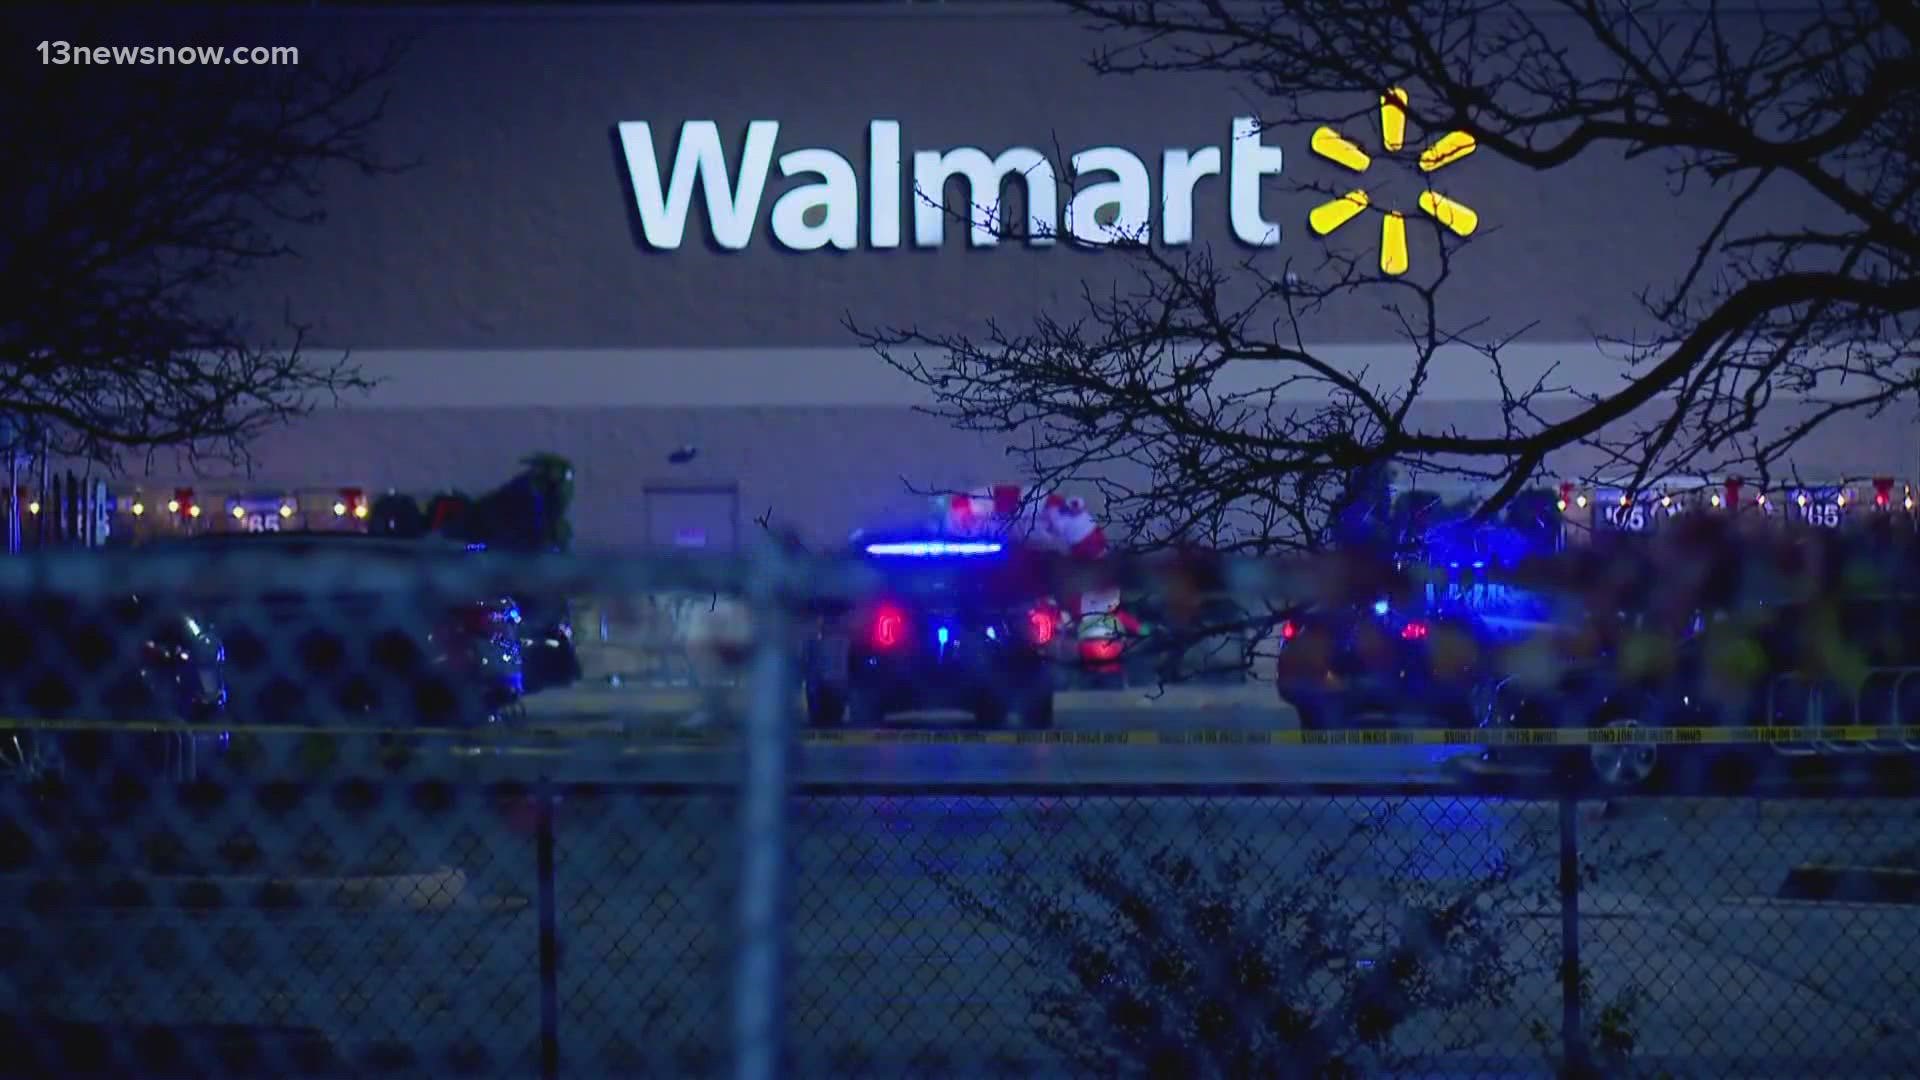 Police confirmed the gunman is dead, and that there were 6 victims killed. Walmart identified the suspected shooter as Andre Bing.